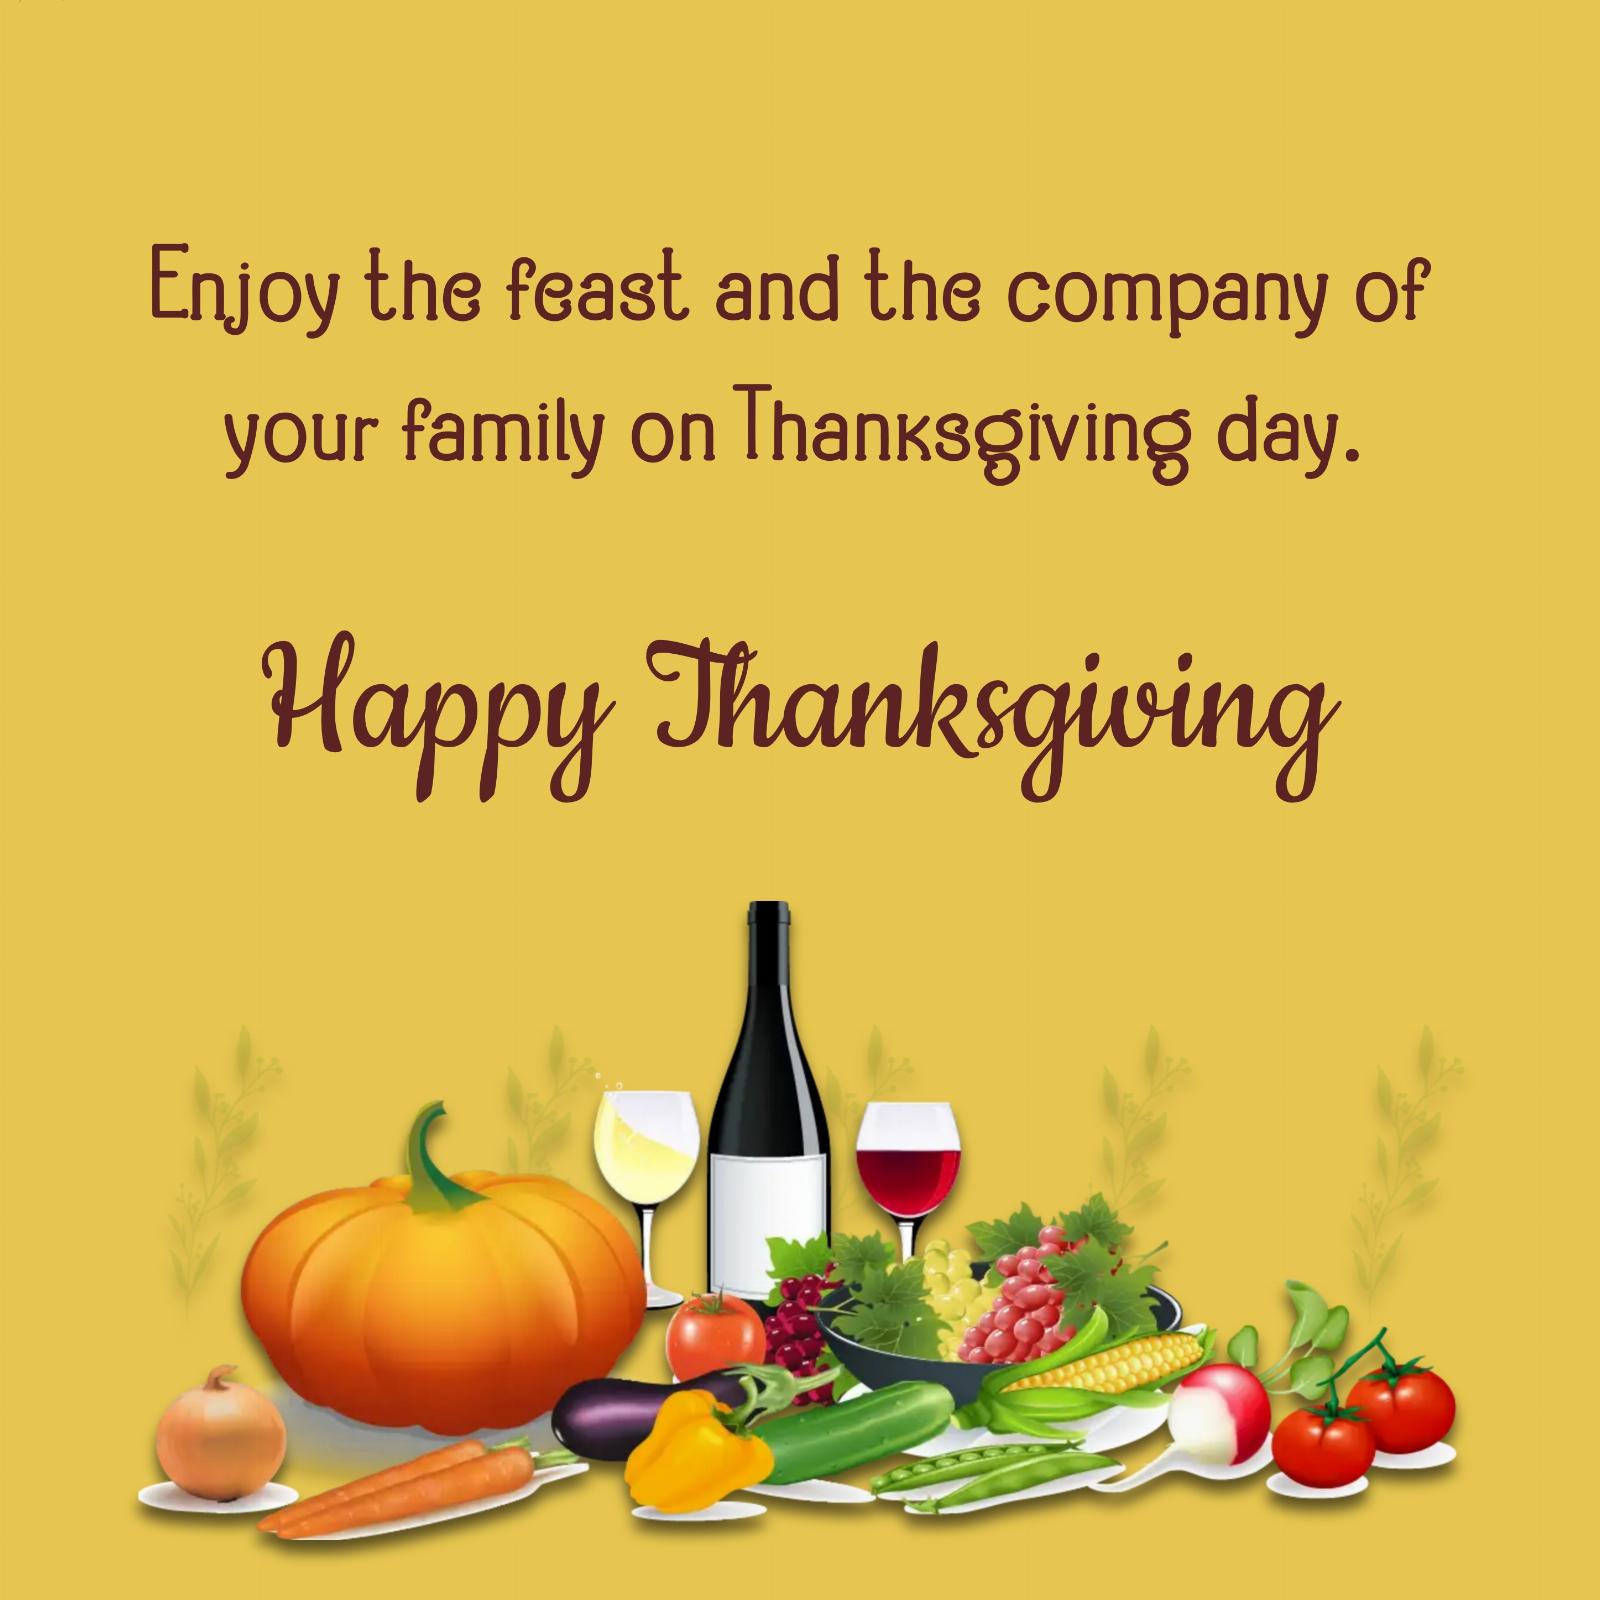 Enjoy the feast and the company of your family on Thanksgiving day